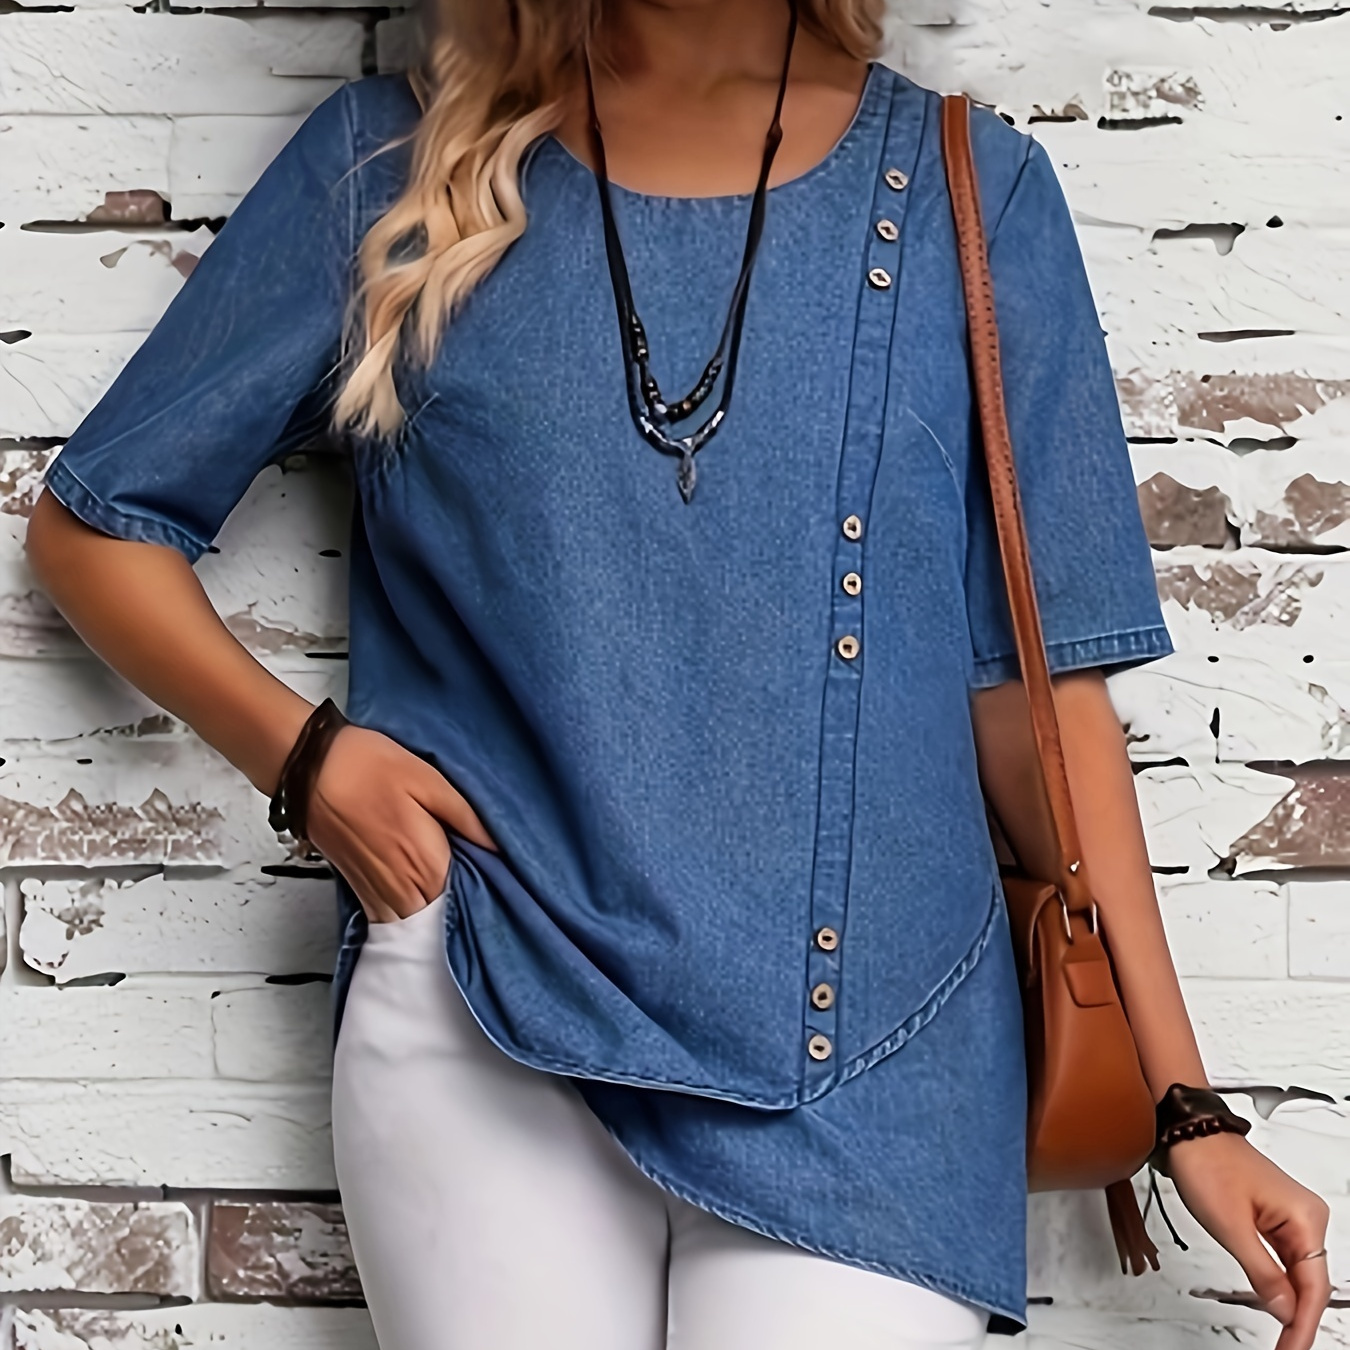 

Women's Elegant Denim Top With Button Detail And Wrap Hem, Stylish Half Sleeve Casual Denim Top For Everyday Wear